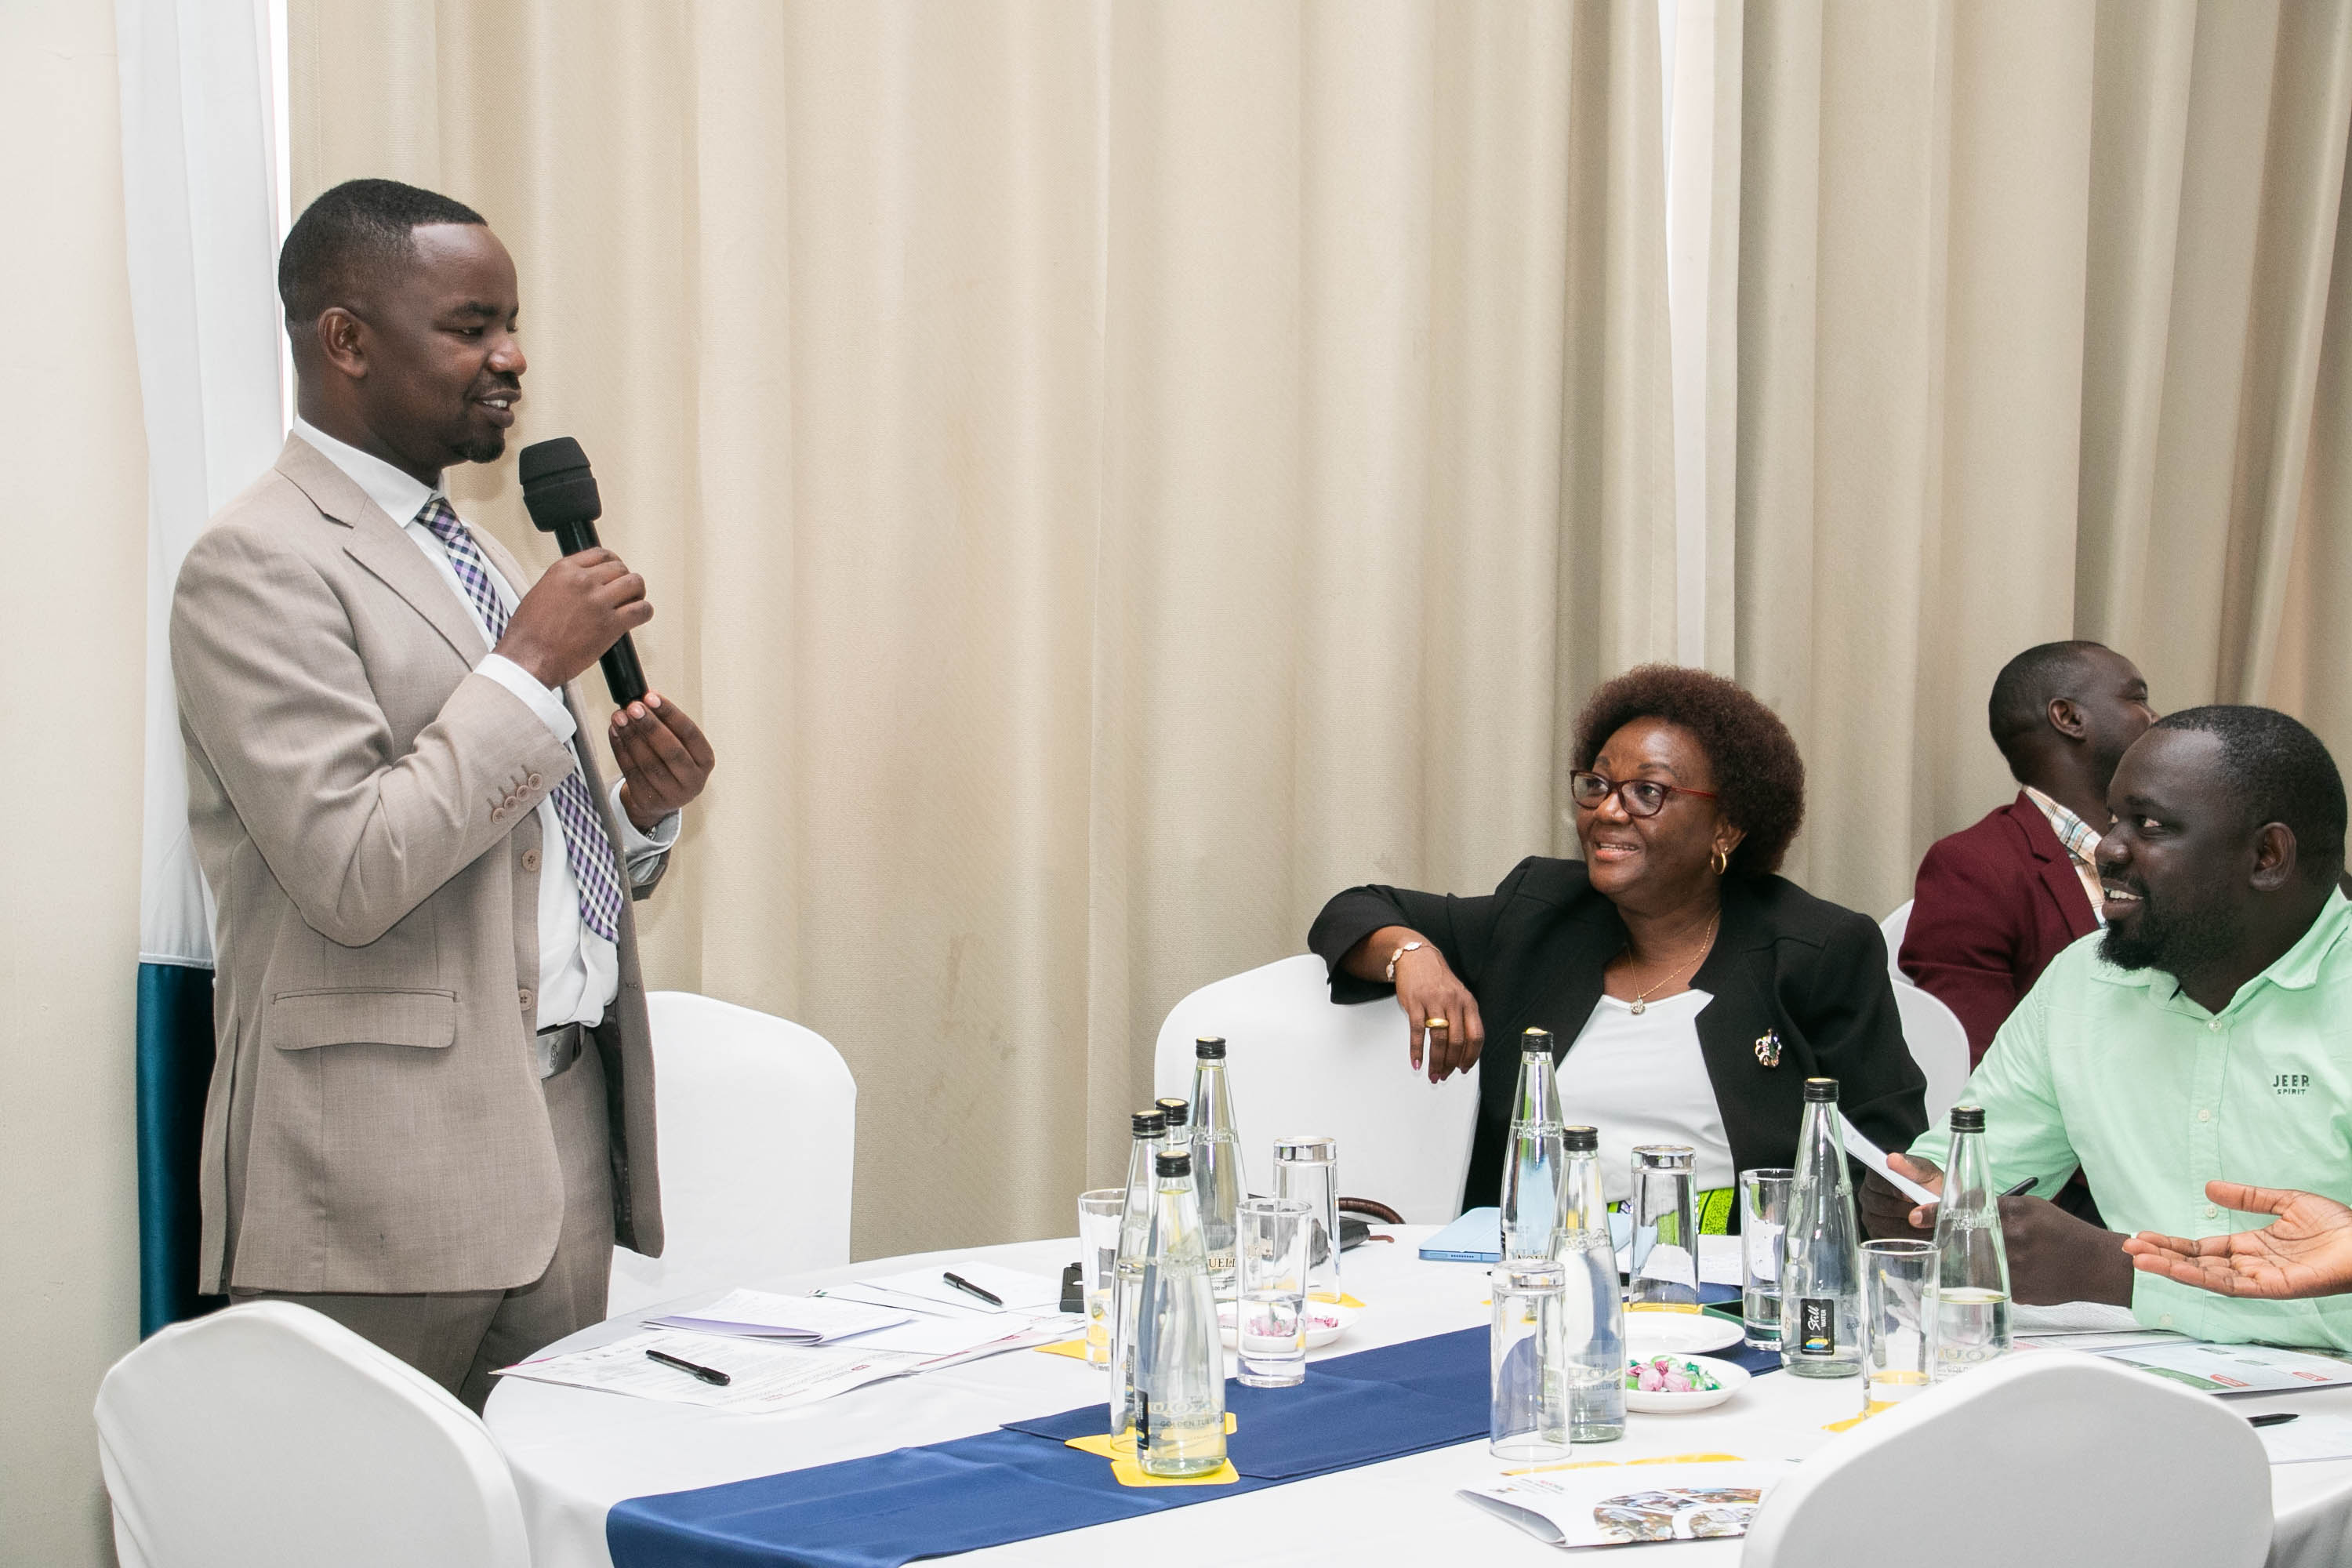 Experts Advocate High-Impact Practices to Maximize Family Planning Benefits in Uganda